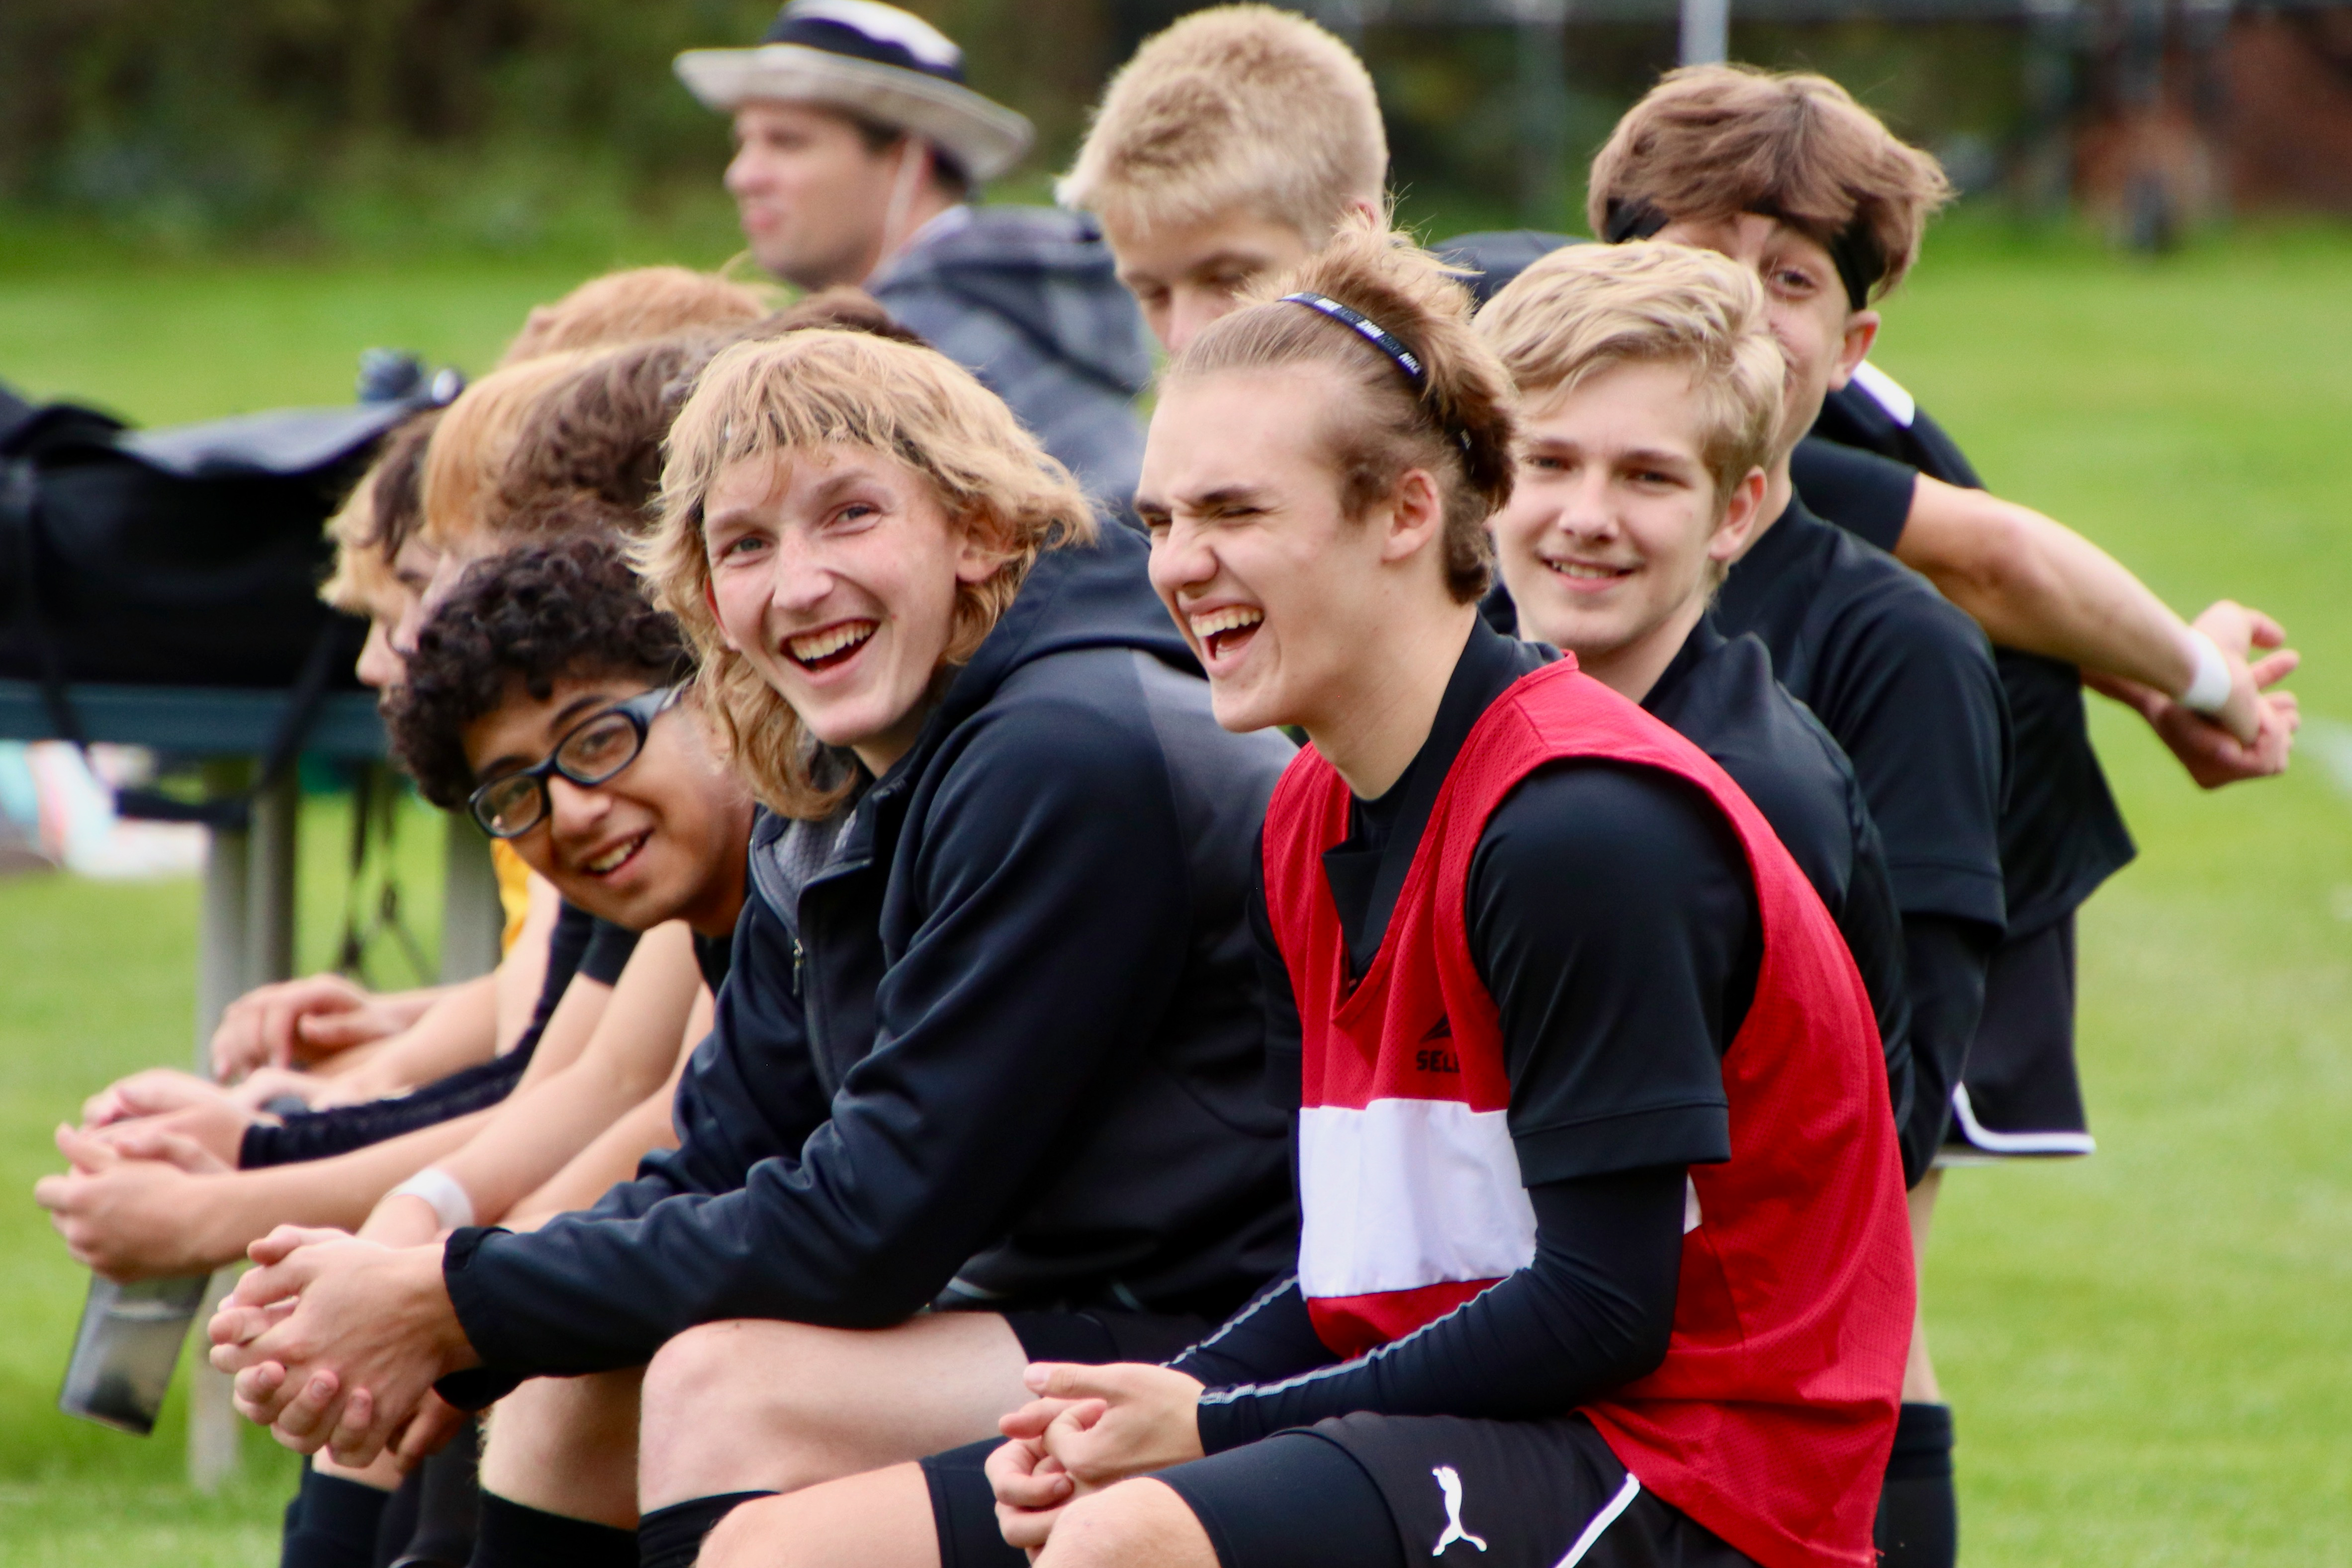 A boys soccer team sits on the bench and many laugh together